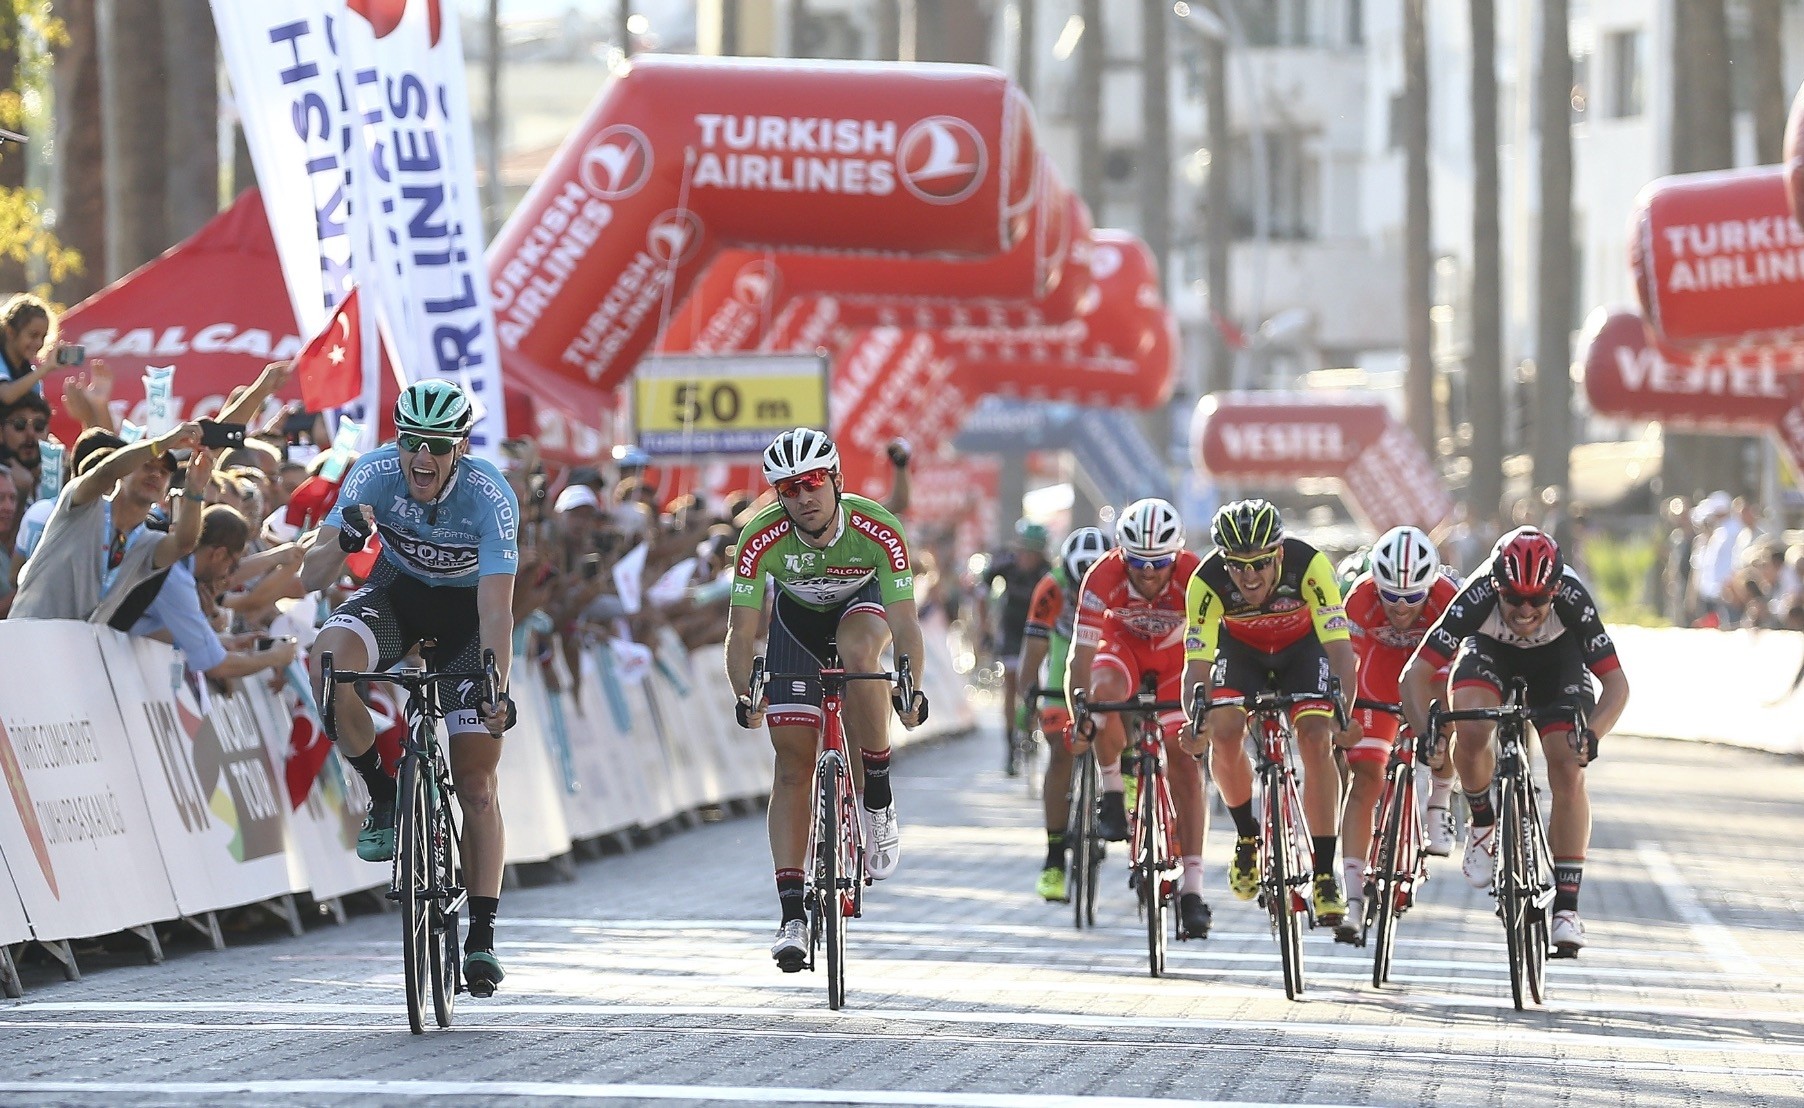 54th Presidential Cycling Tour of Turkey starts today Daily Sabah